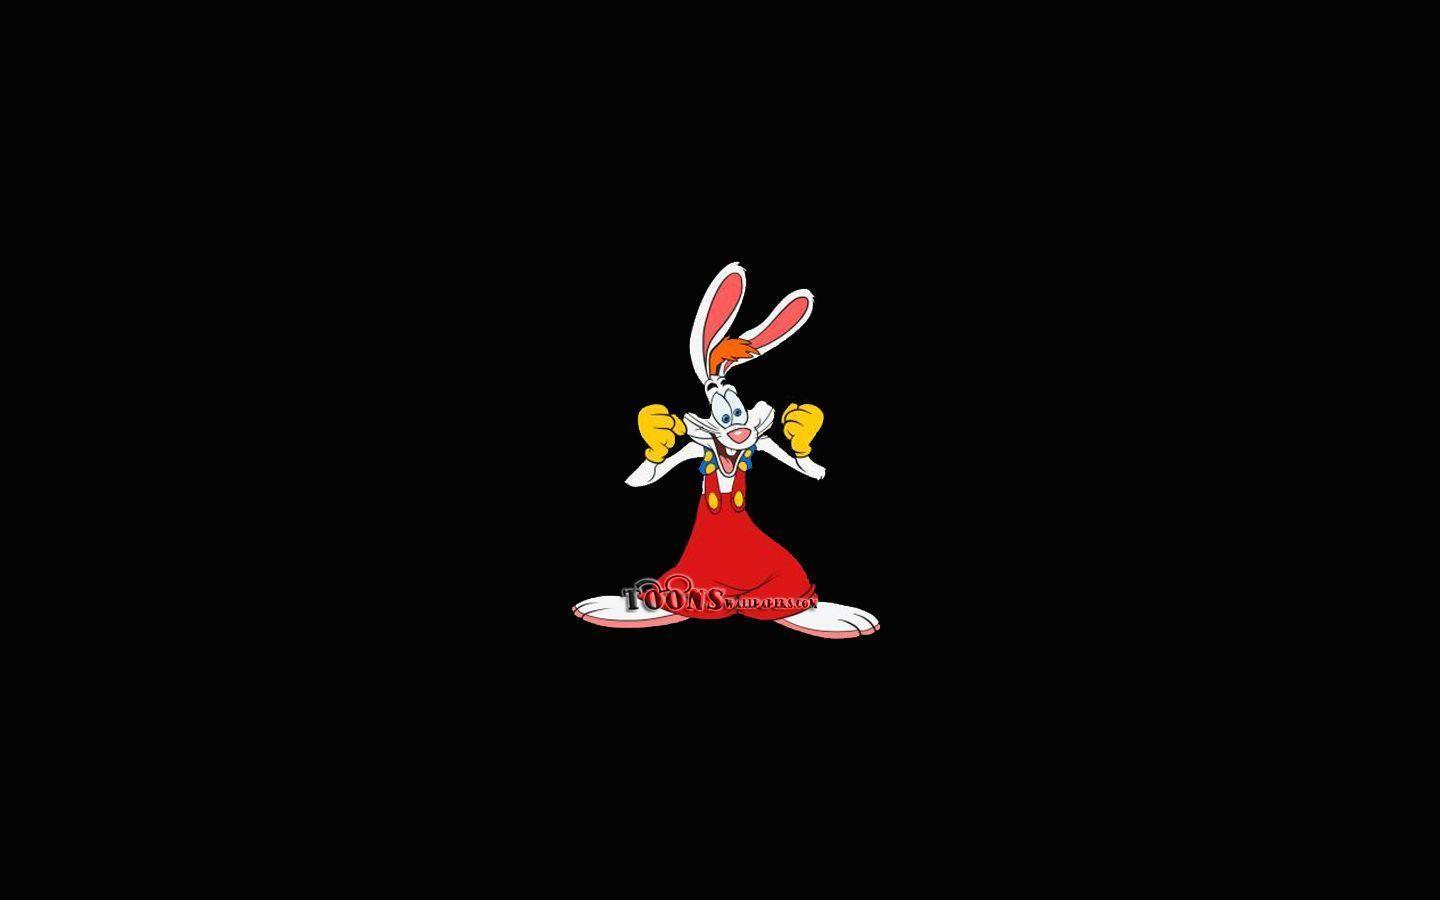 Movie Who Framed Roger Rabbit Wallpaper 1440x900 px Free Download